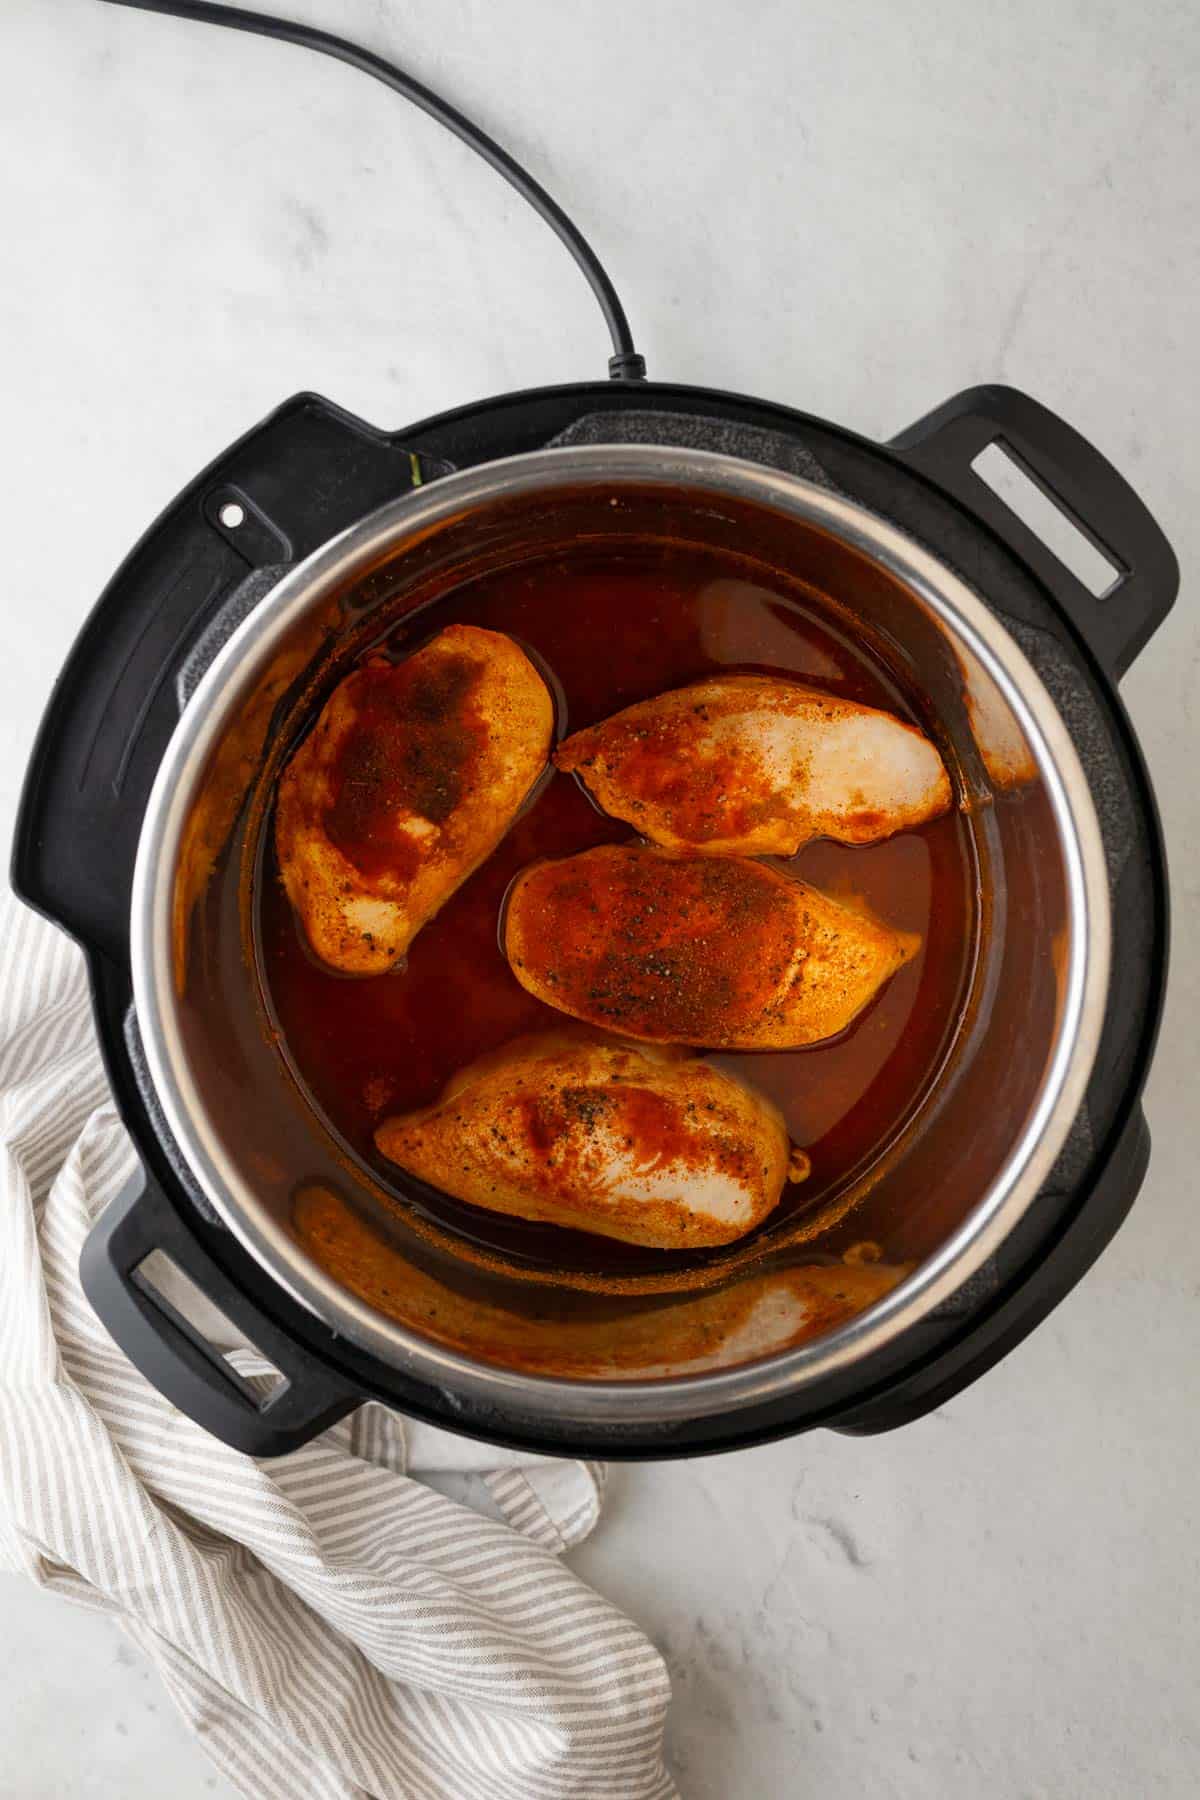 cooked chicken breasts in the instant pot after pressure cooking